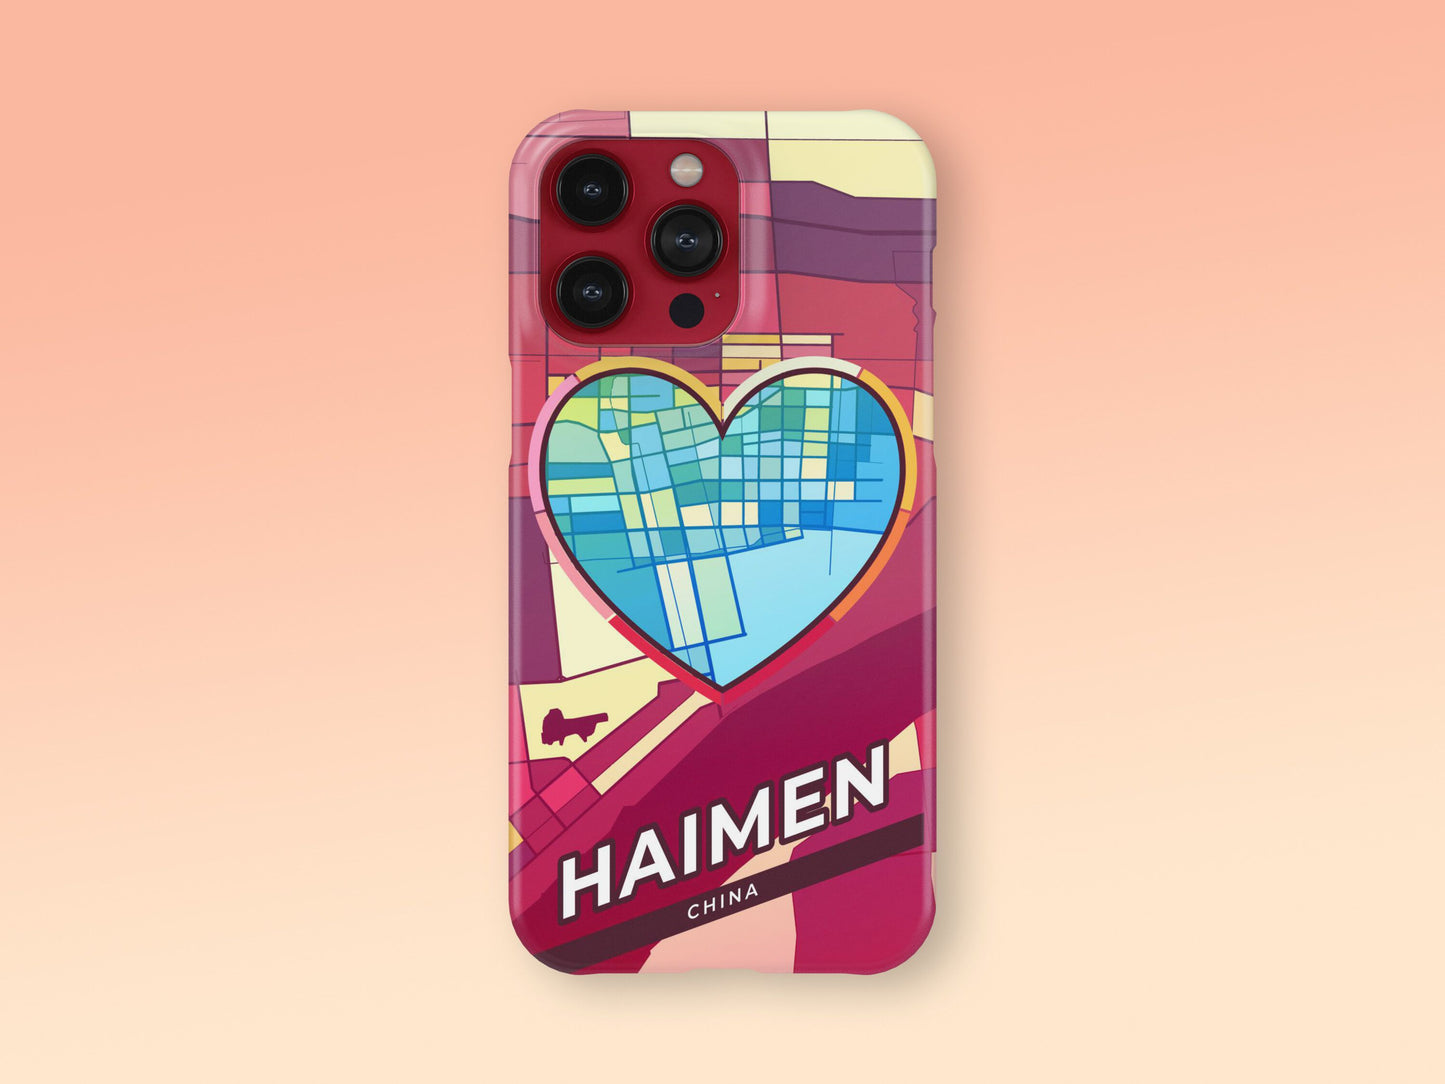 Haimen China slim phone case with colorful icon. Birthday, wedding or housewarming gift. Couple match cases. 2